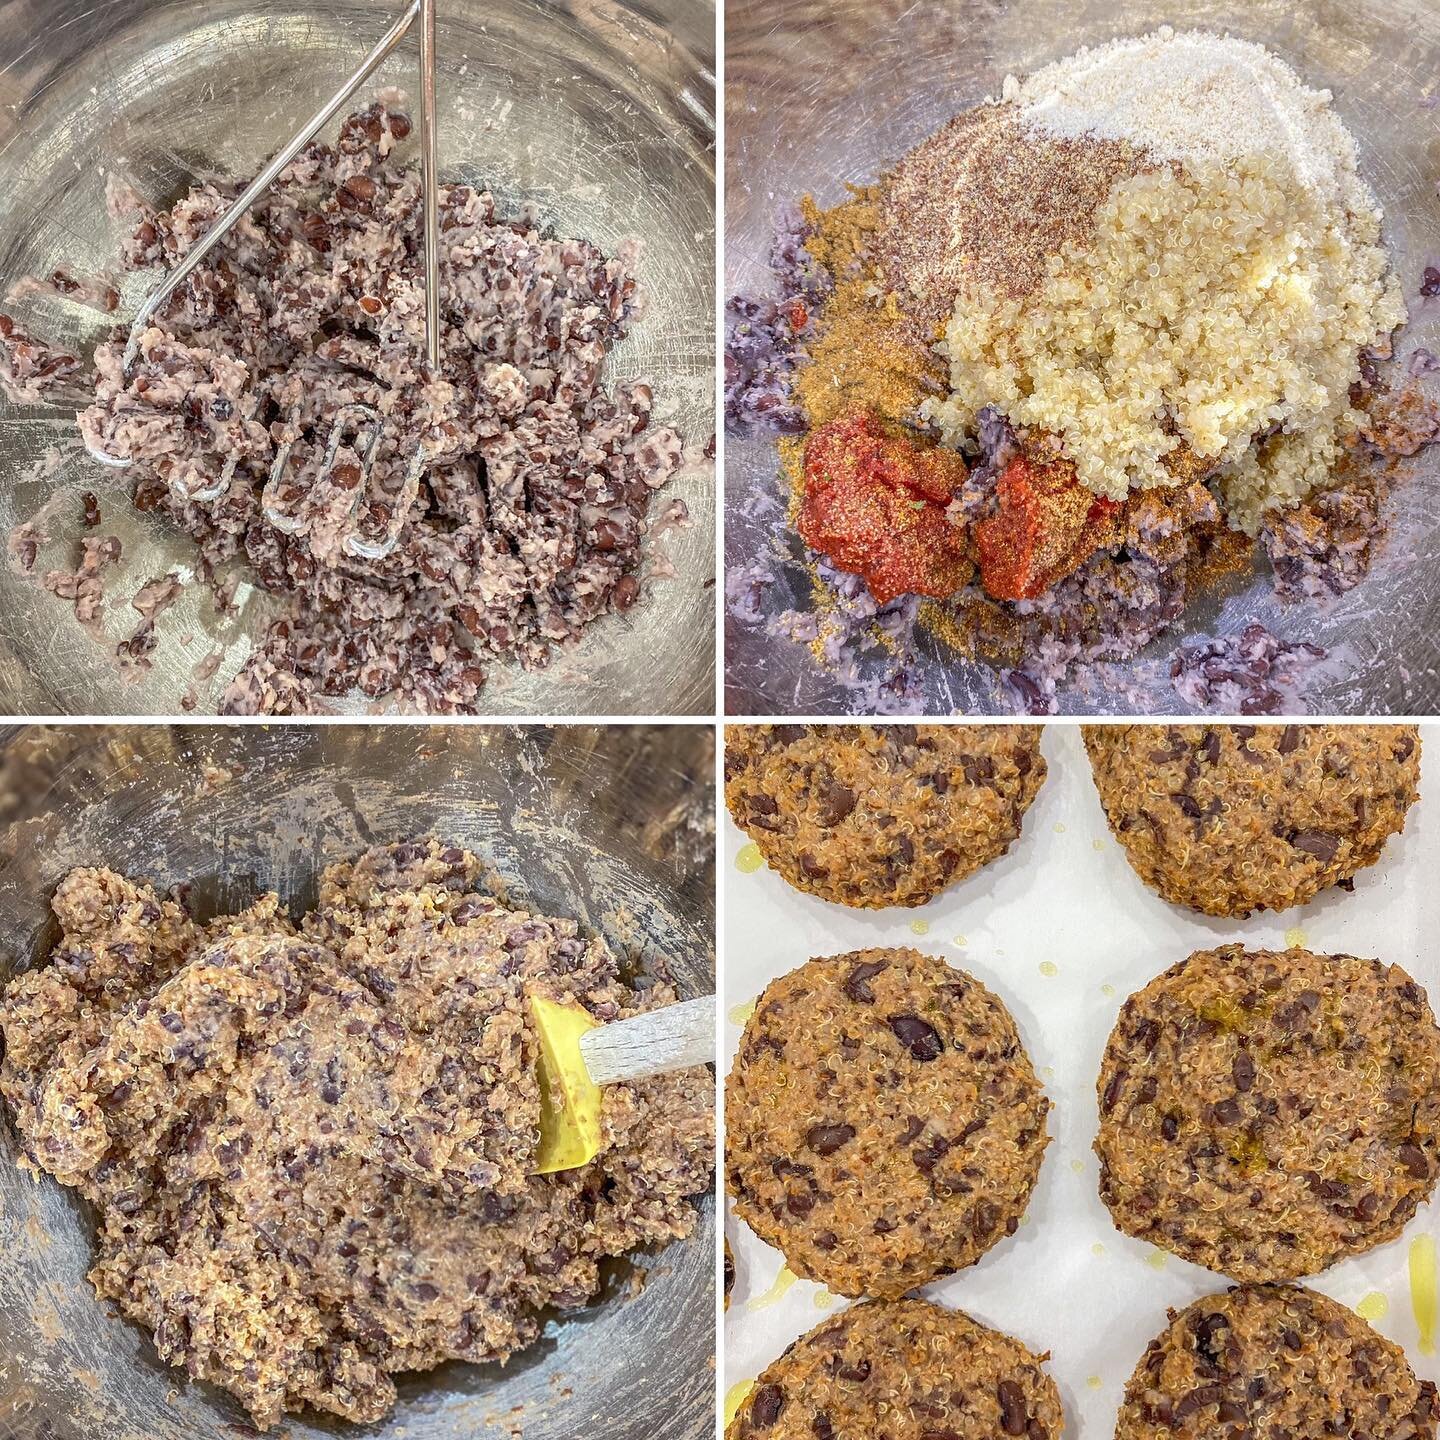 Vegan and Gluten-Free Burger Patty🍔Black beans and quinoa make a great patty! The rest of the flavors and add-ins I have listed can be adjusted and substituted to you liking. For example, if you don&rsquo;t want to add ground flax and almond flour, 